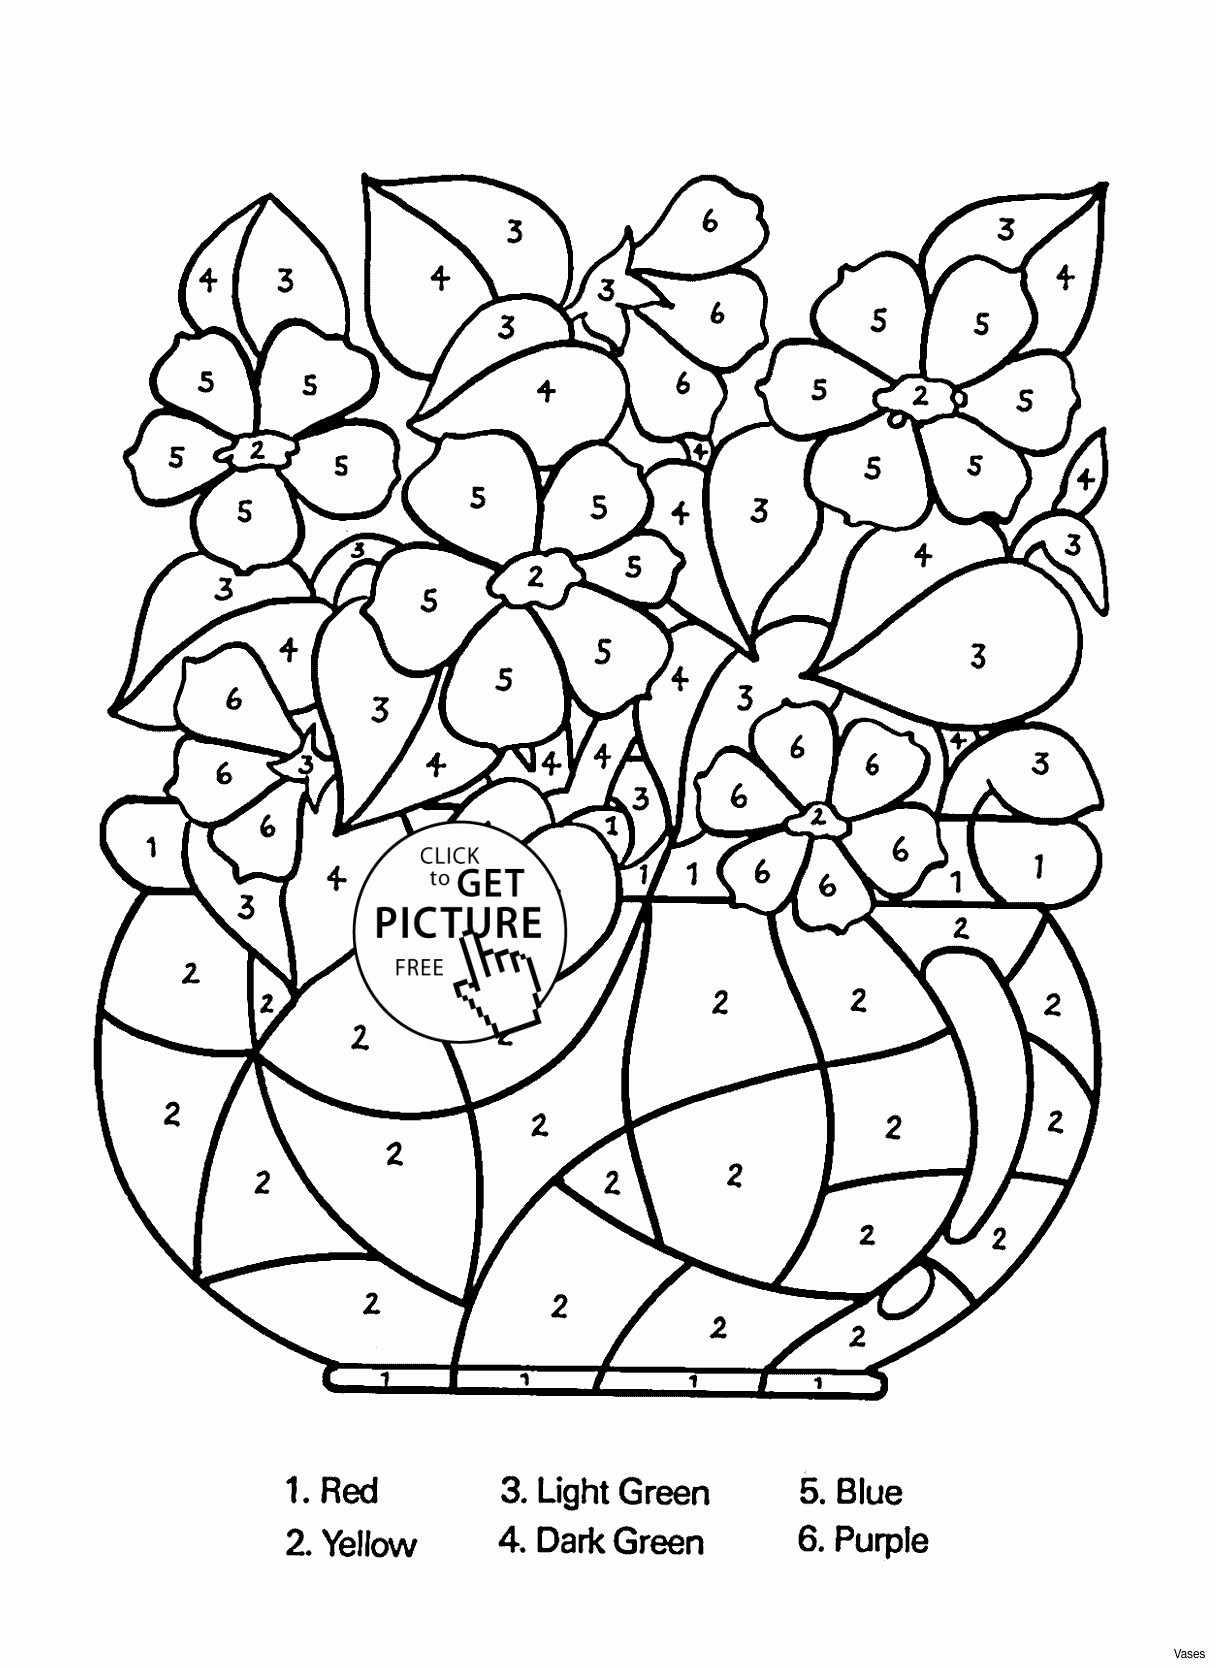 single flower vase of advanced coloring pages of flowers 2019 vases flower vase coloring throughout advanced coloring pages of flowers 2019 vases flower vase coloring page pages flowers in a top i 0d and free